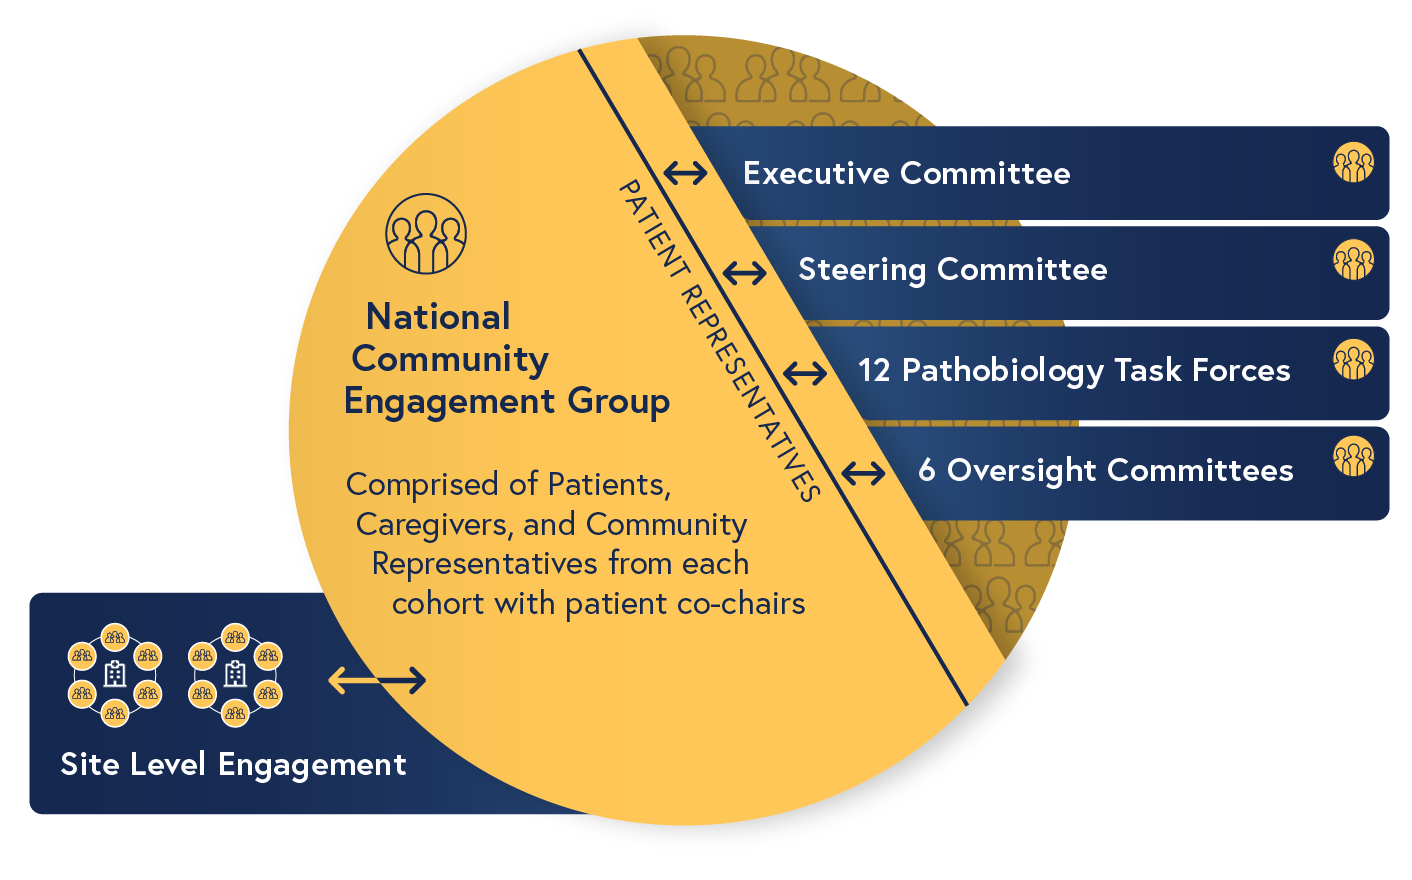 National Community Engagement Group. Made up of Patient, Caregiver, and Community Representatives from each study grouping with patient co-chairs. Site-Level Engagement interacting with NCEG. Representatives interacting with Executive Committee, Steering Committee, 12 Pathobiology Task Forces, and 6 Oversight Committees.